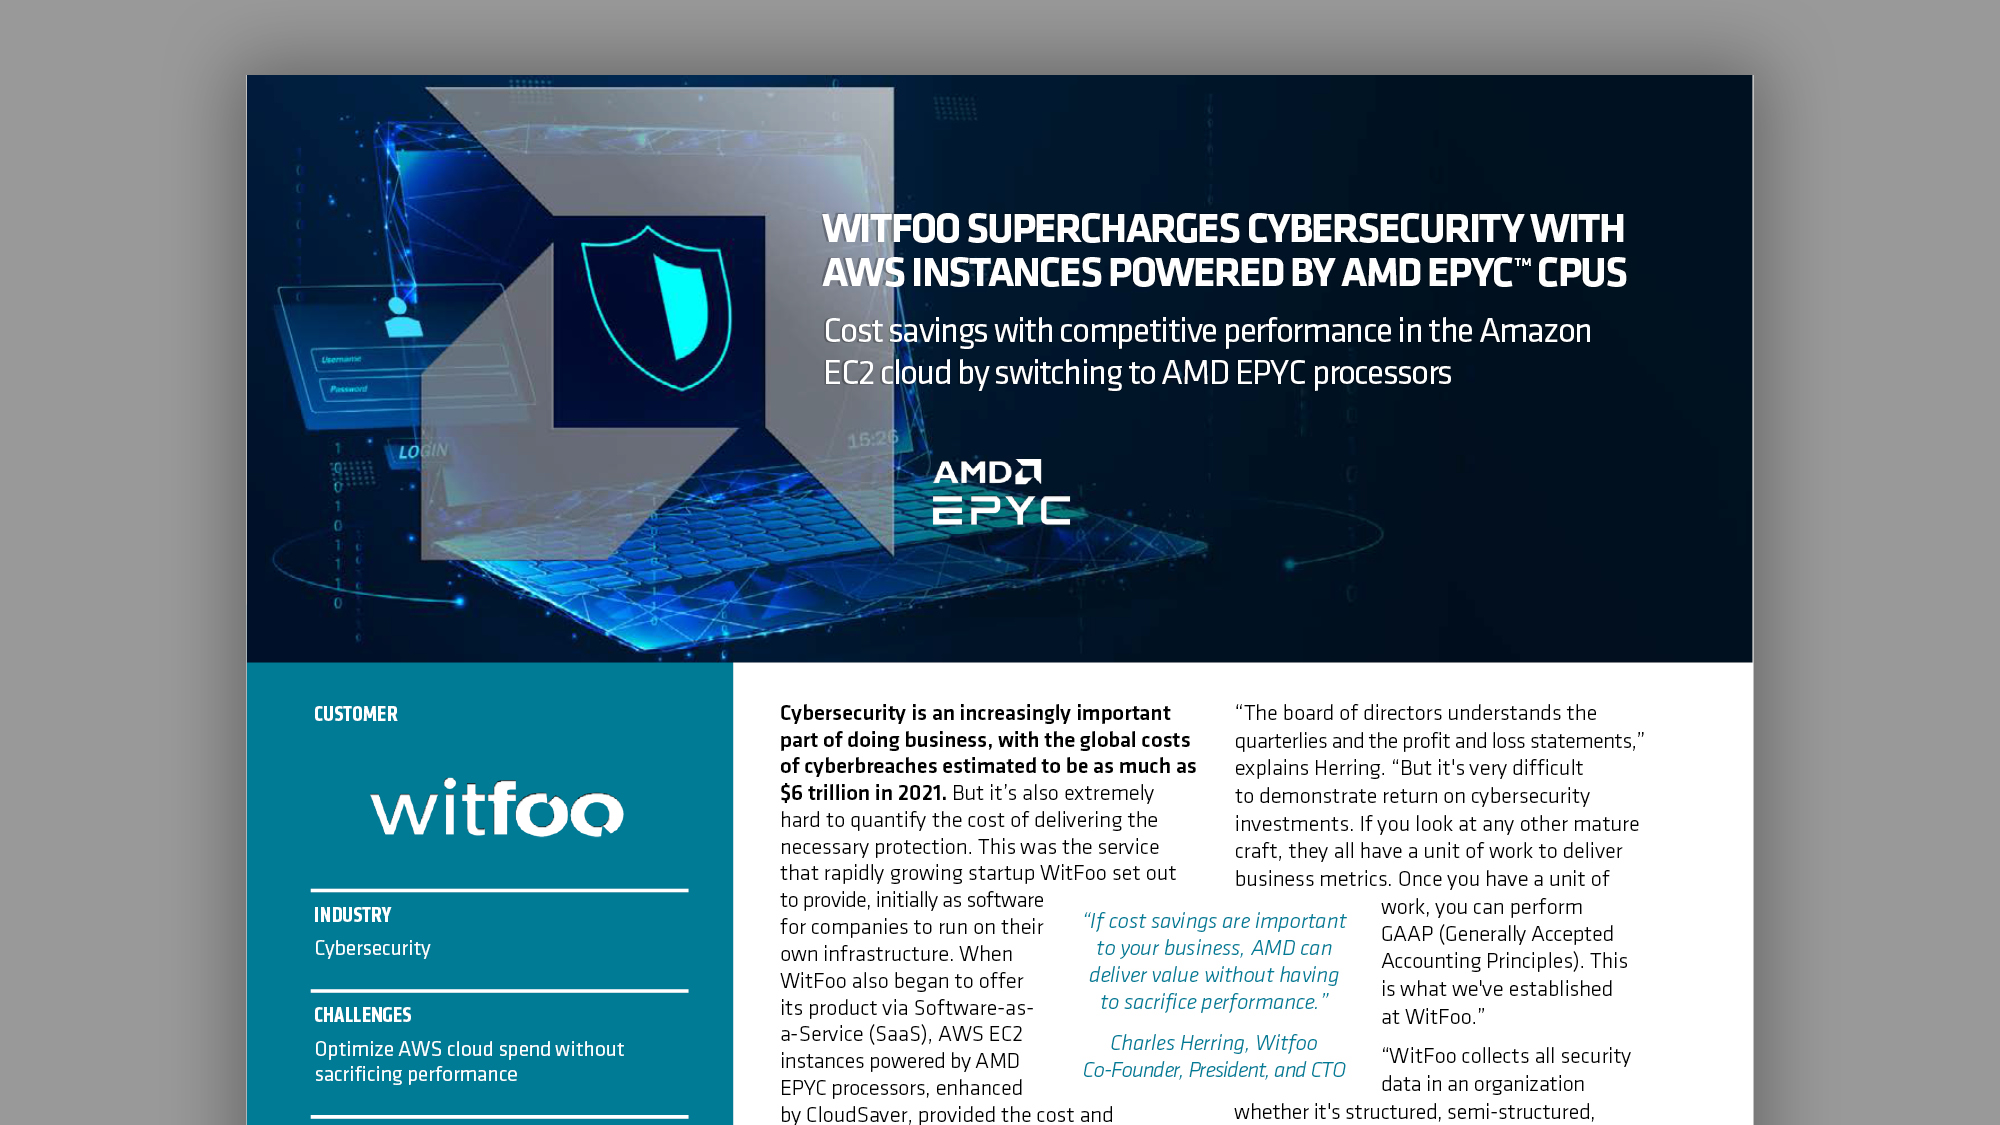 CloudSaver Featured in AMD’s Witfoo Case Study